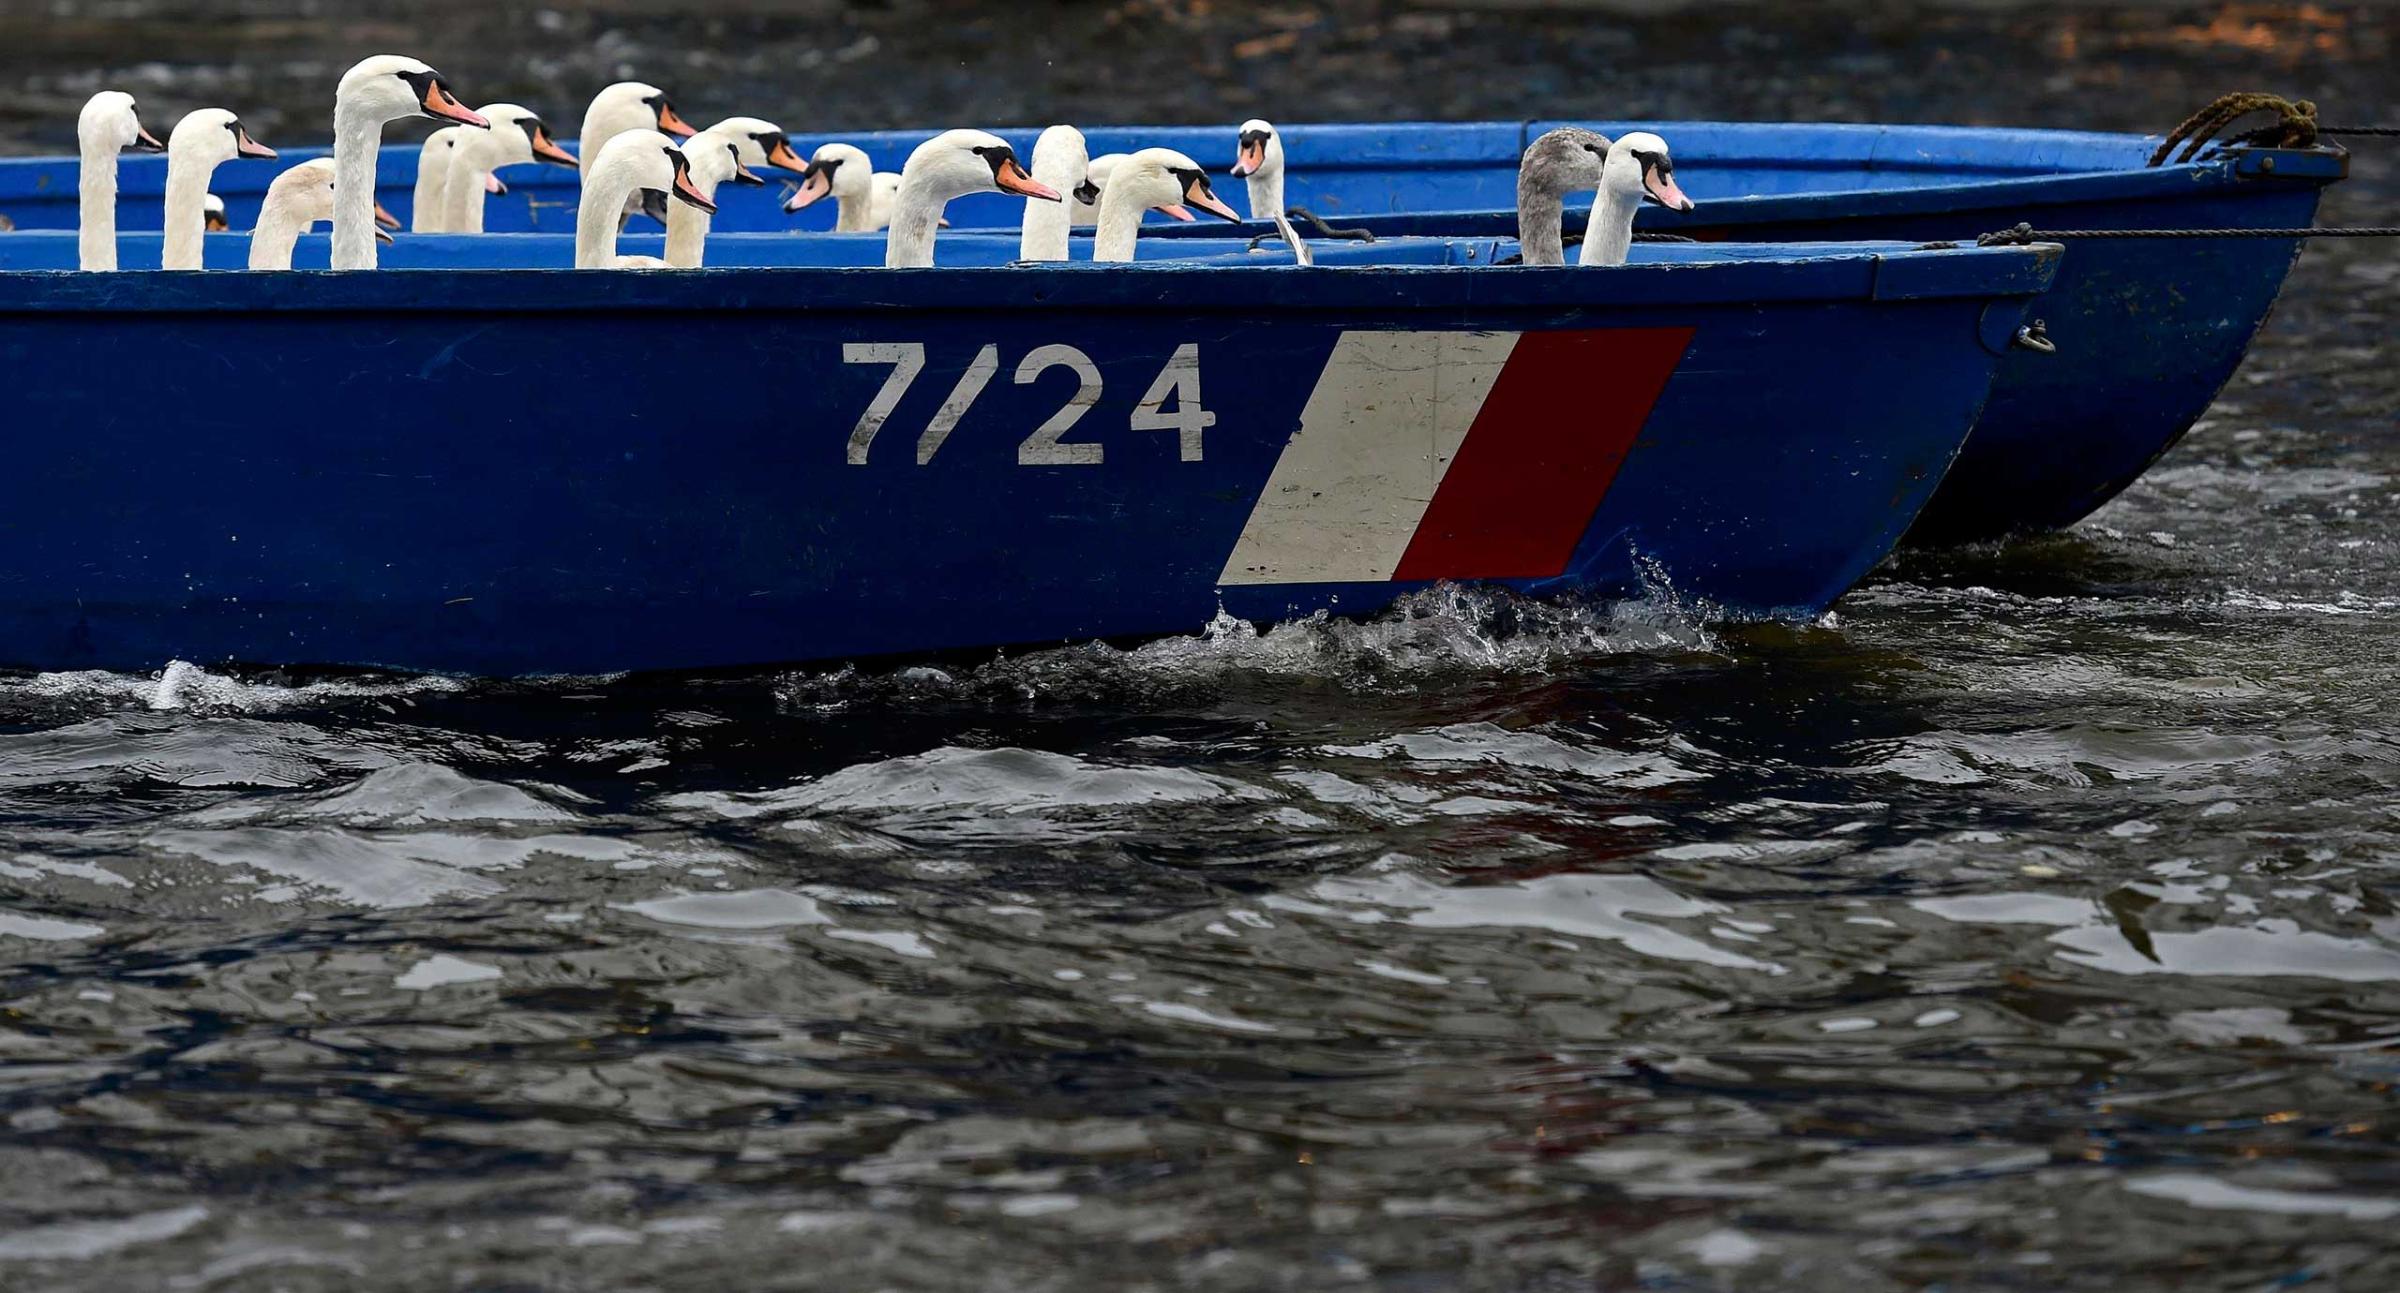 Swans sit in a boat after they were rounded up from Hamburg's lake Alster, Nov. 18, 2014.